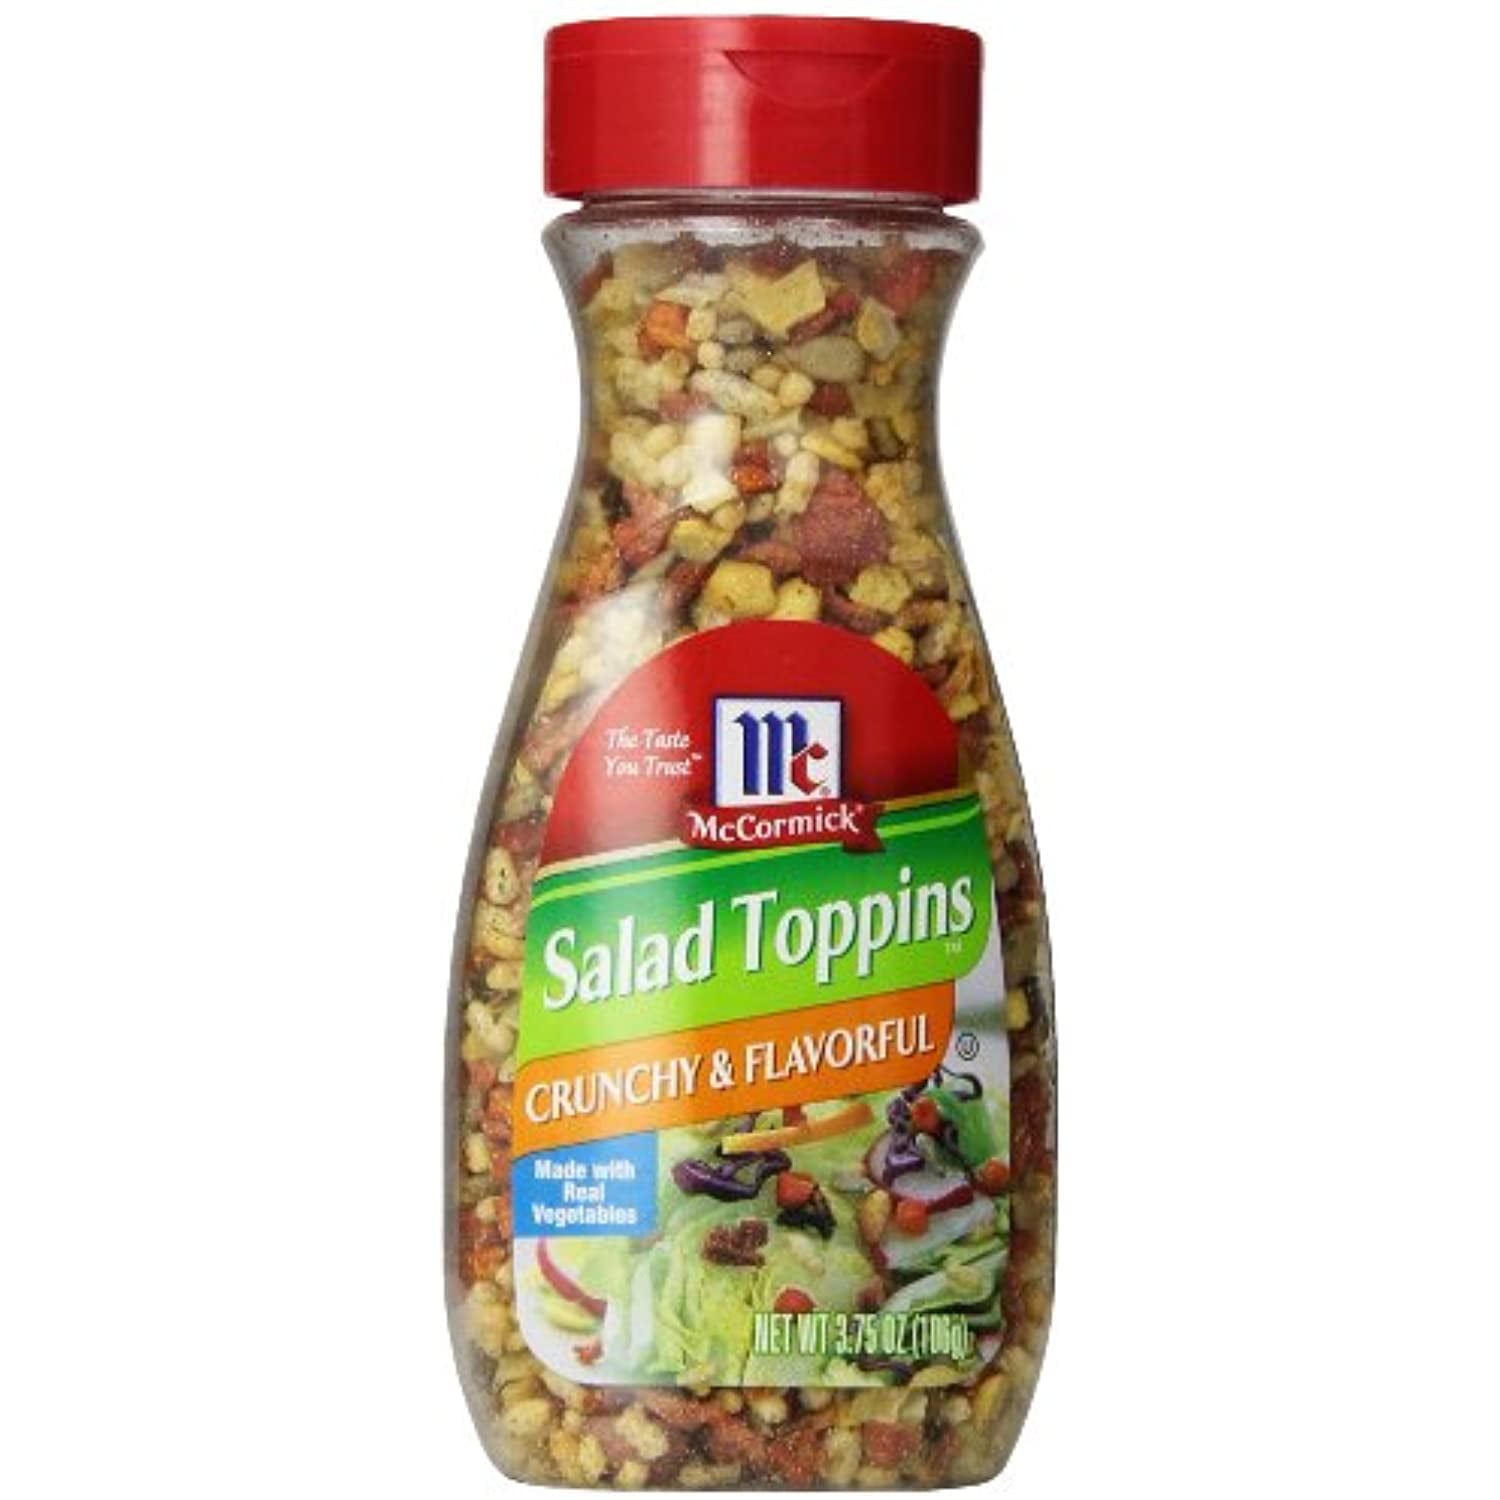 3 x McCormick Salad Toppins Crunchy Flavorful Toppings 3.75 oz Bottle  Classic